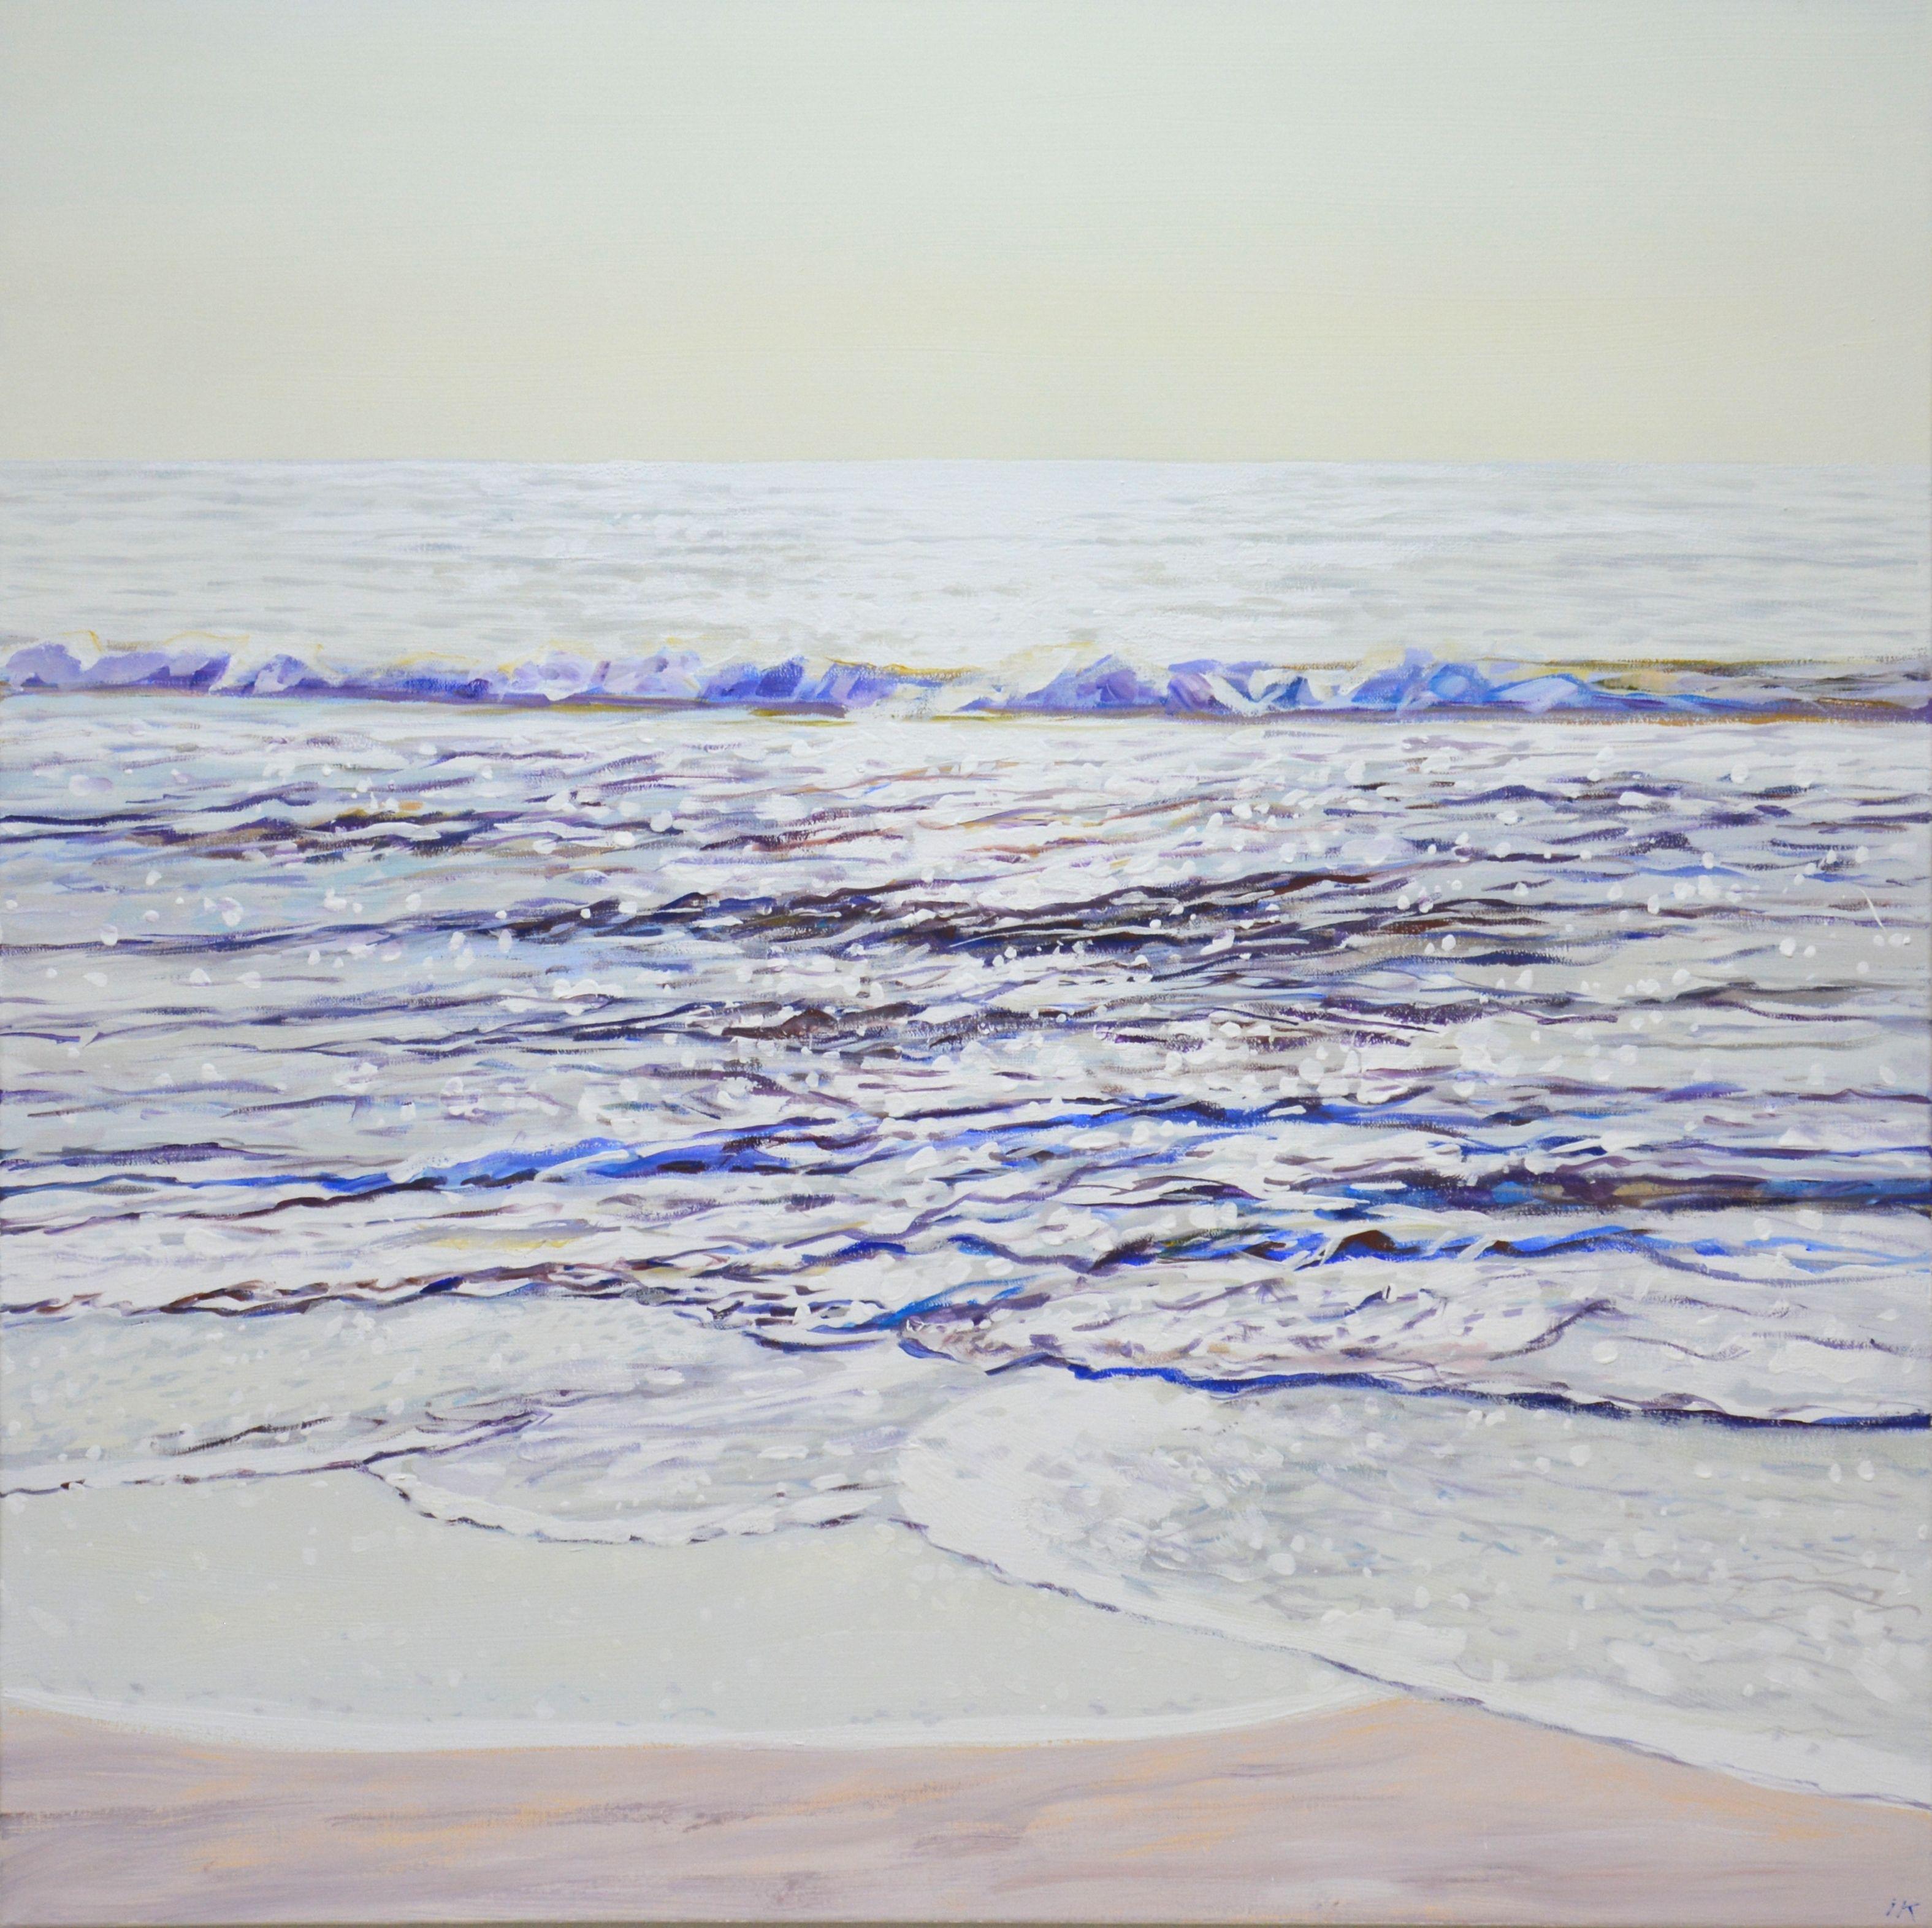 The sounds of the morning waves. The shining ocean, small waves, glare on the water, the beach, clear sky create an atmosphere of relaxation, romance. Made in the style of realism, Light colors, white palette emphasizes the energy of water. Part of